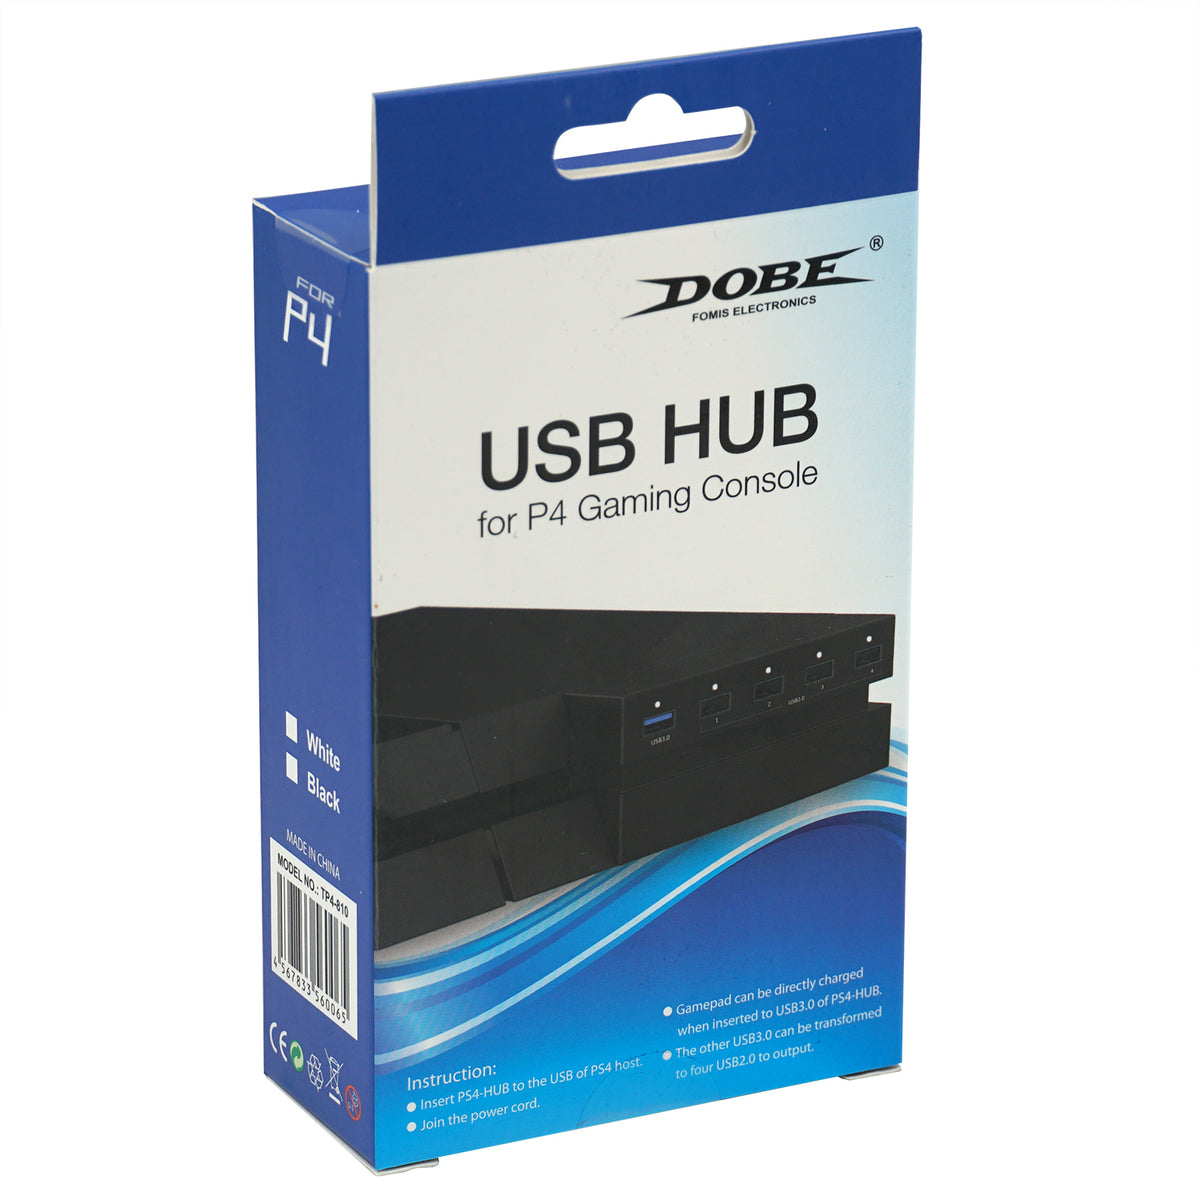 Dobe 2 to 5 USB HUB for PS4 System